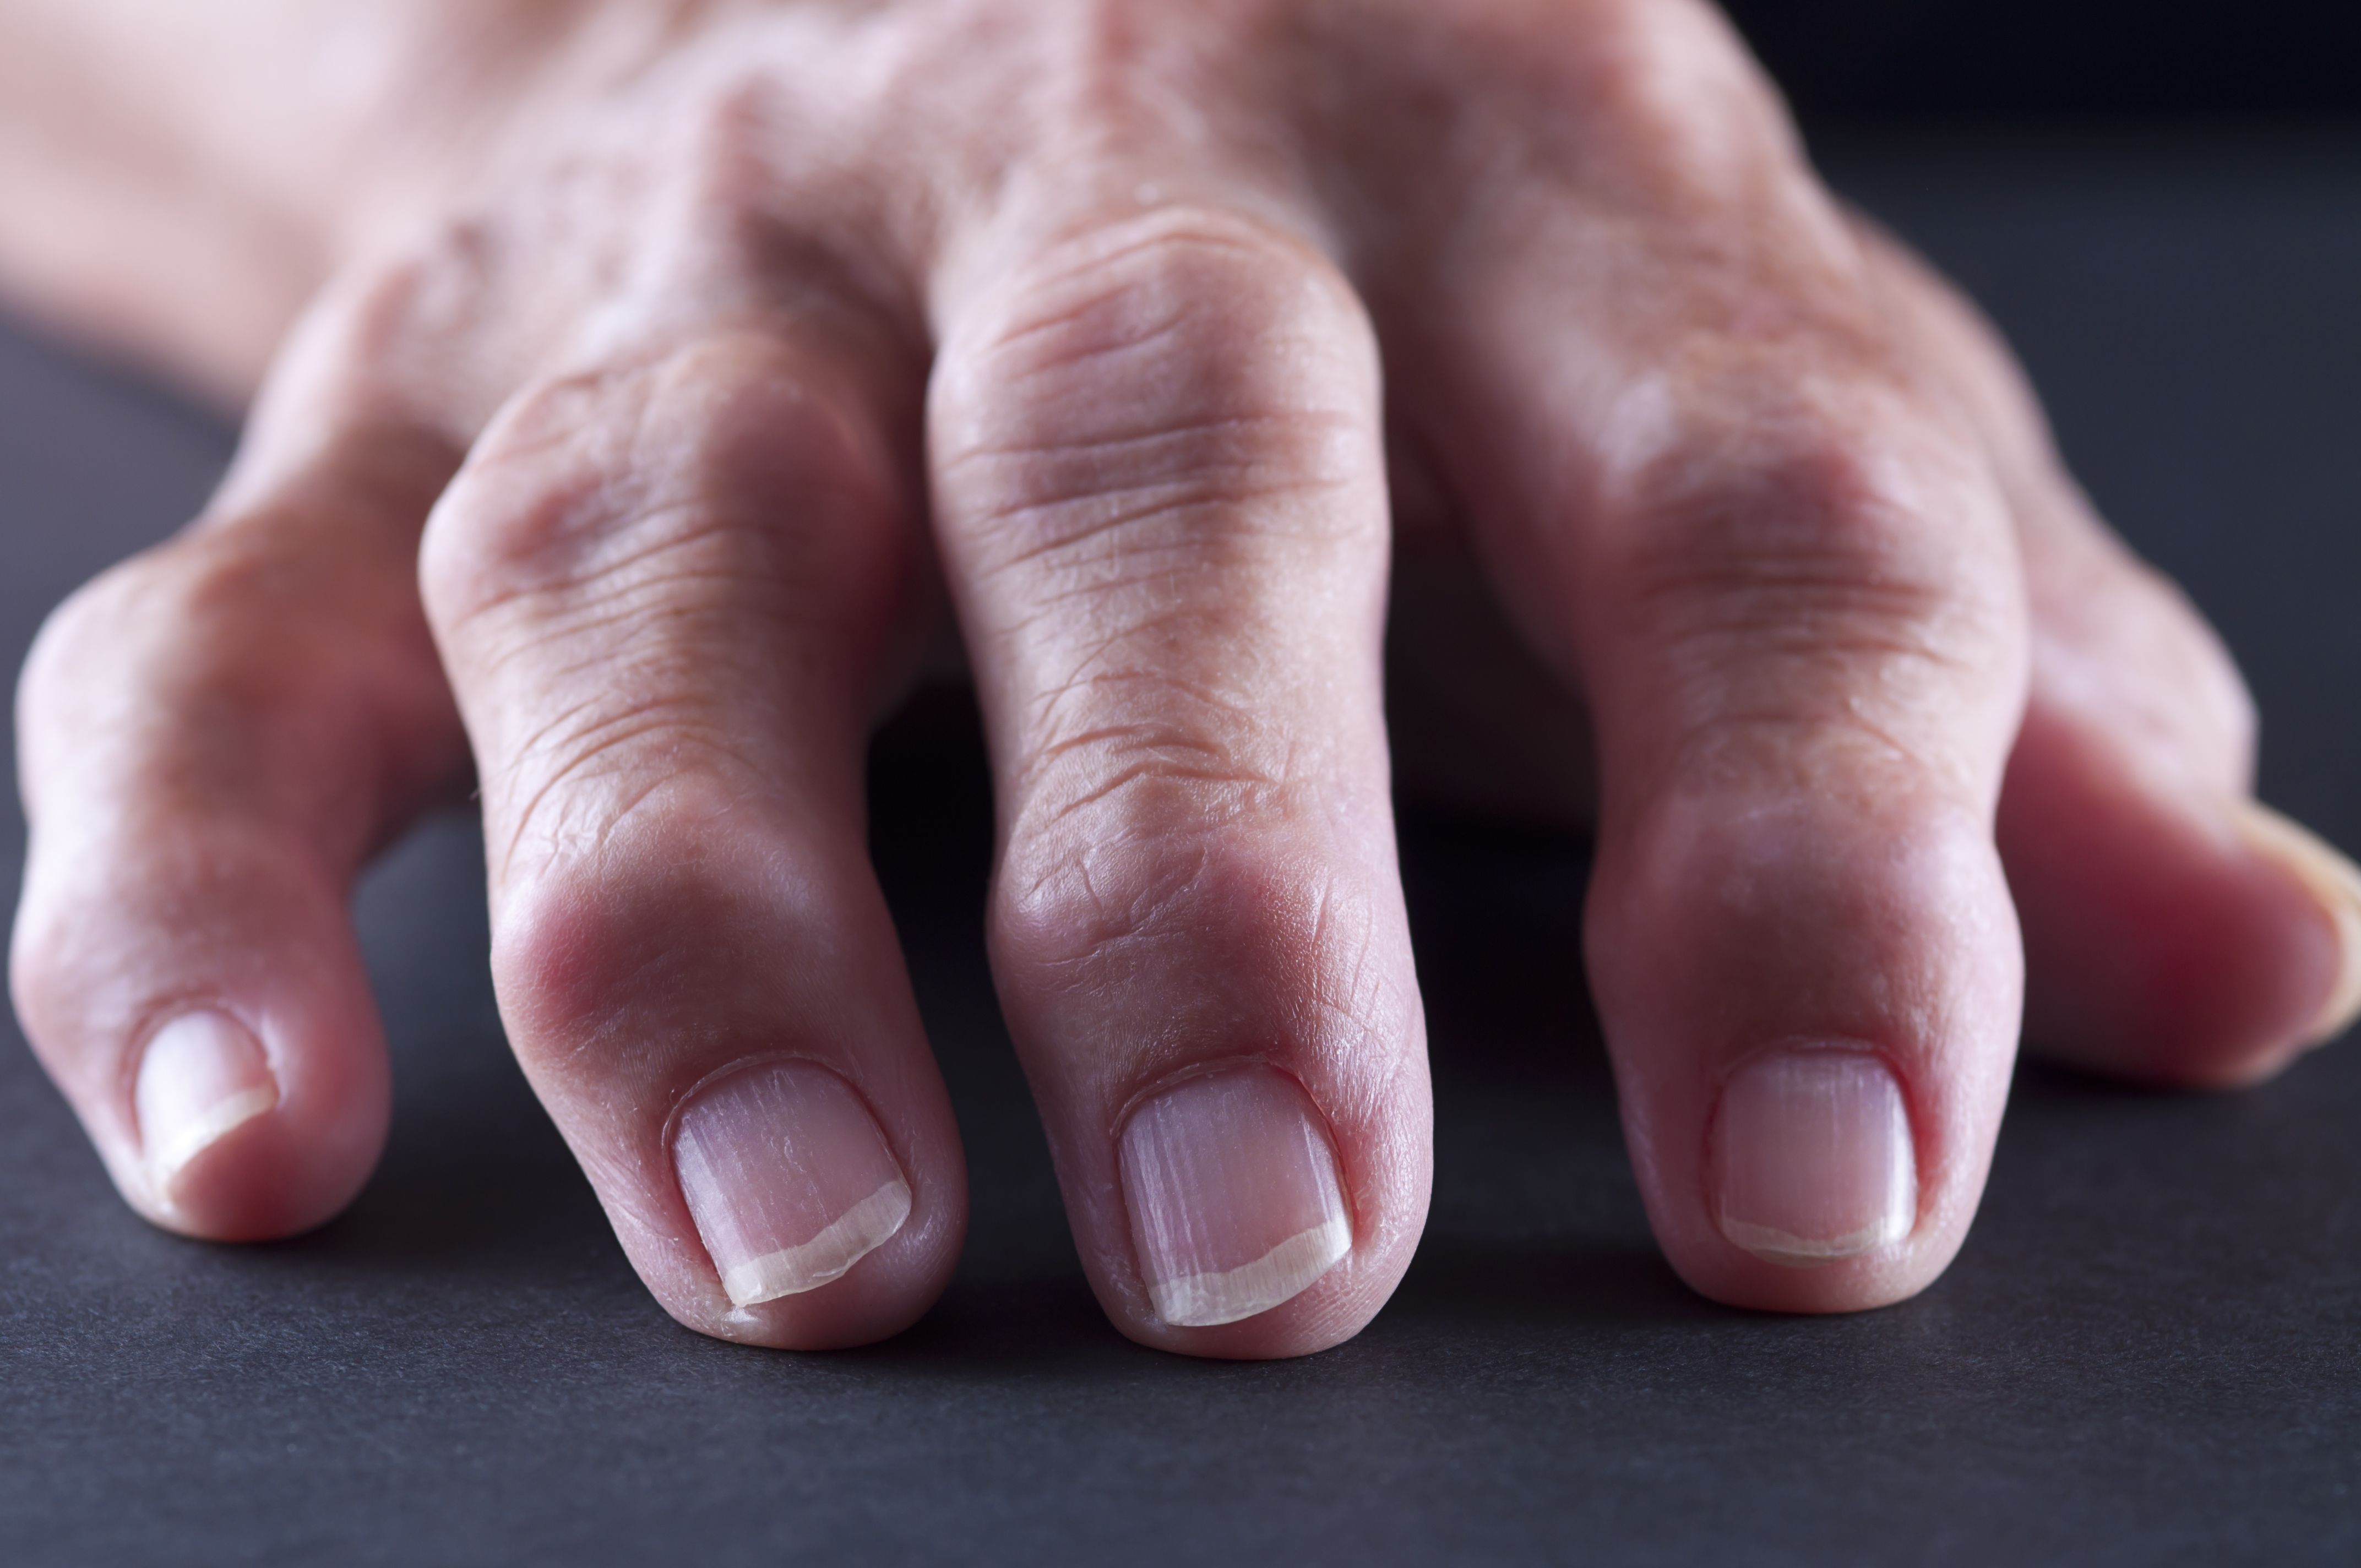 Arthritis in the Fingers and Knuckles: Pictures and Symptoms